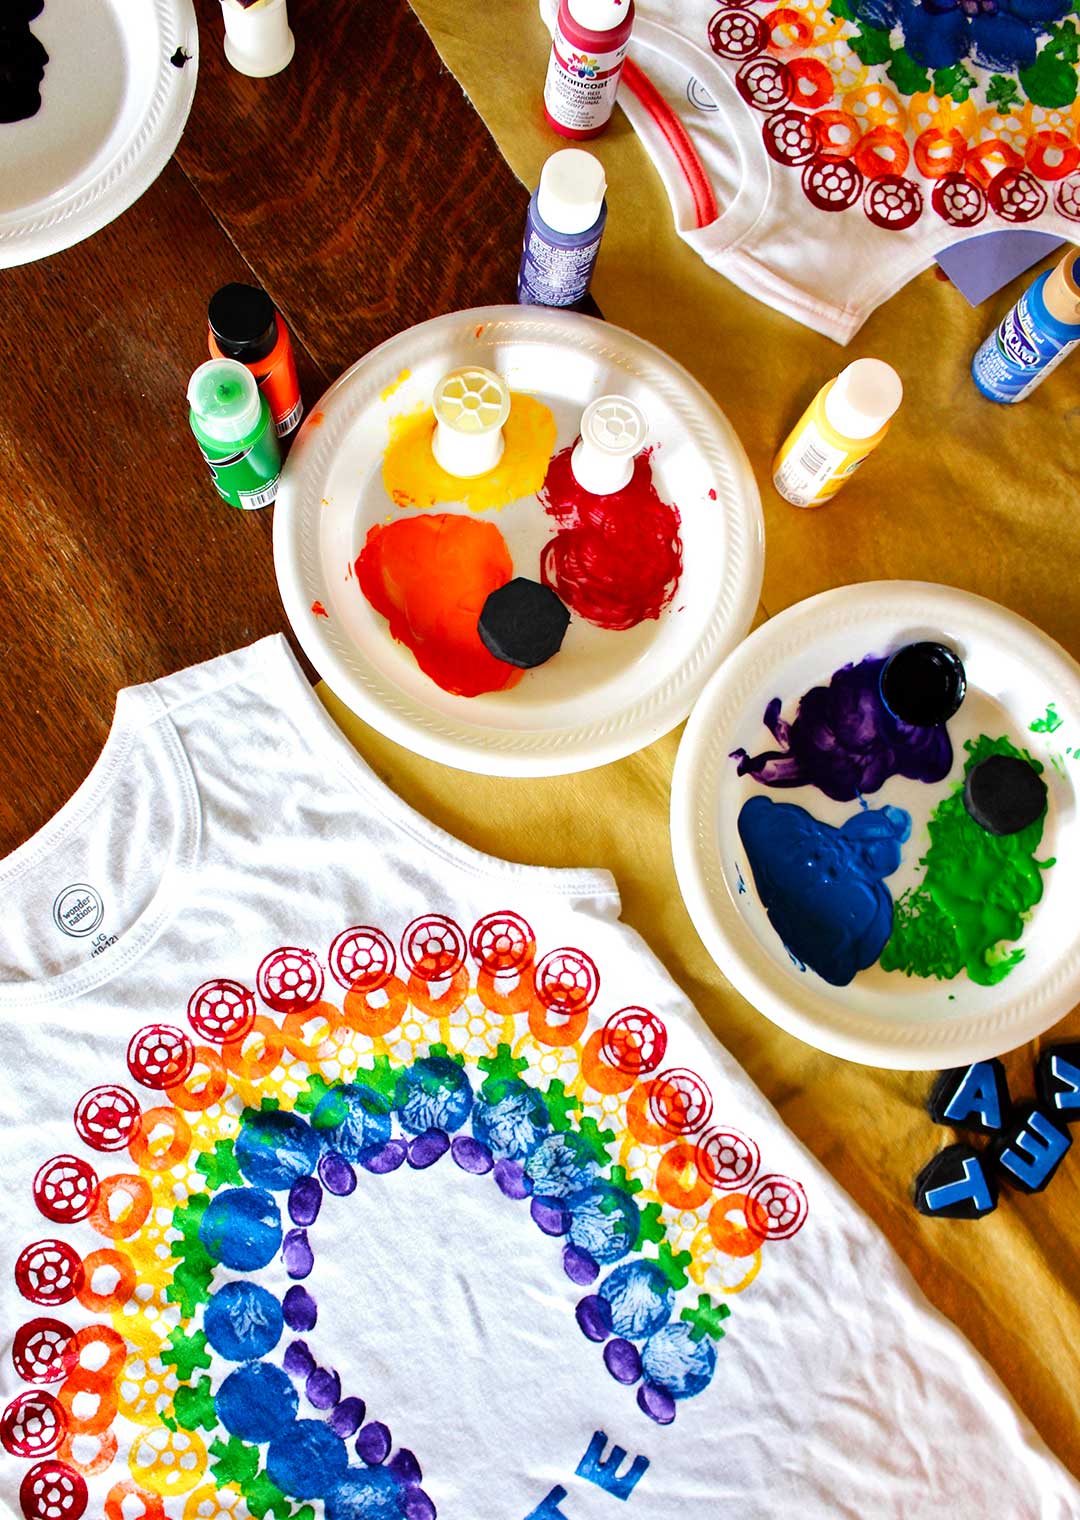 DIY Summer Rainbow Party full of ideas - THE place for all things